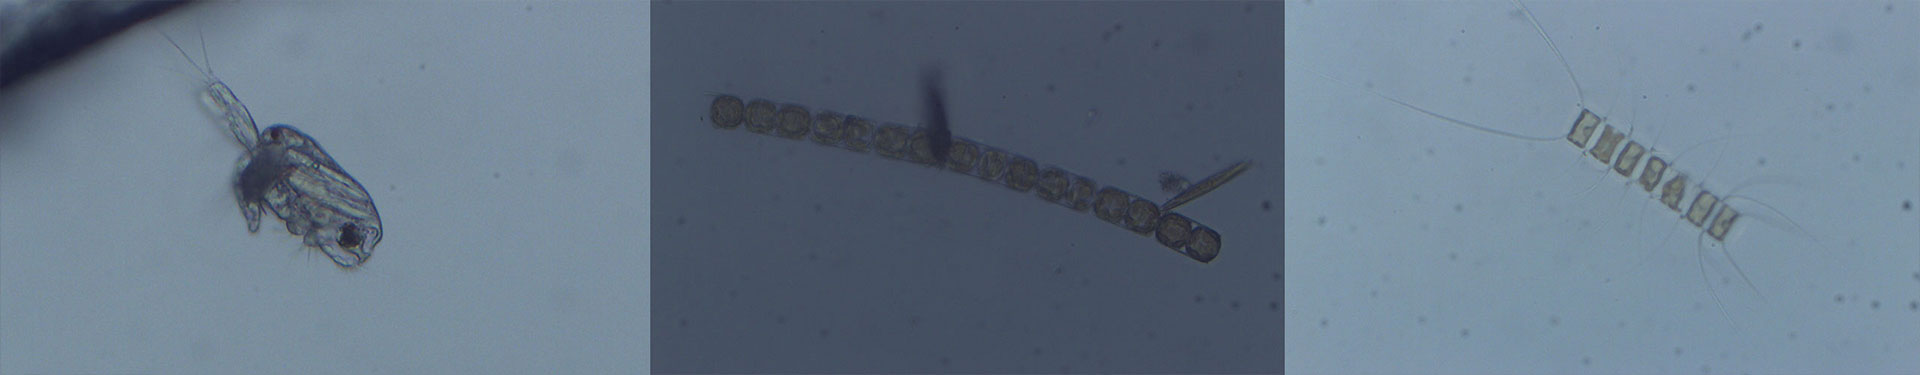 Tulalip Natural Resources Department image of microscopic organism